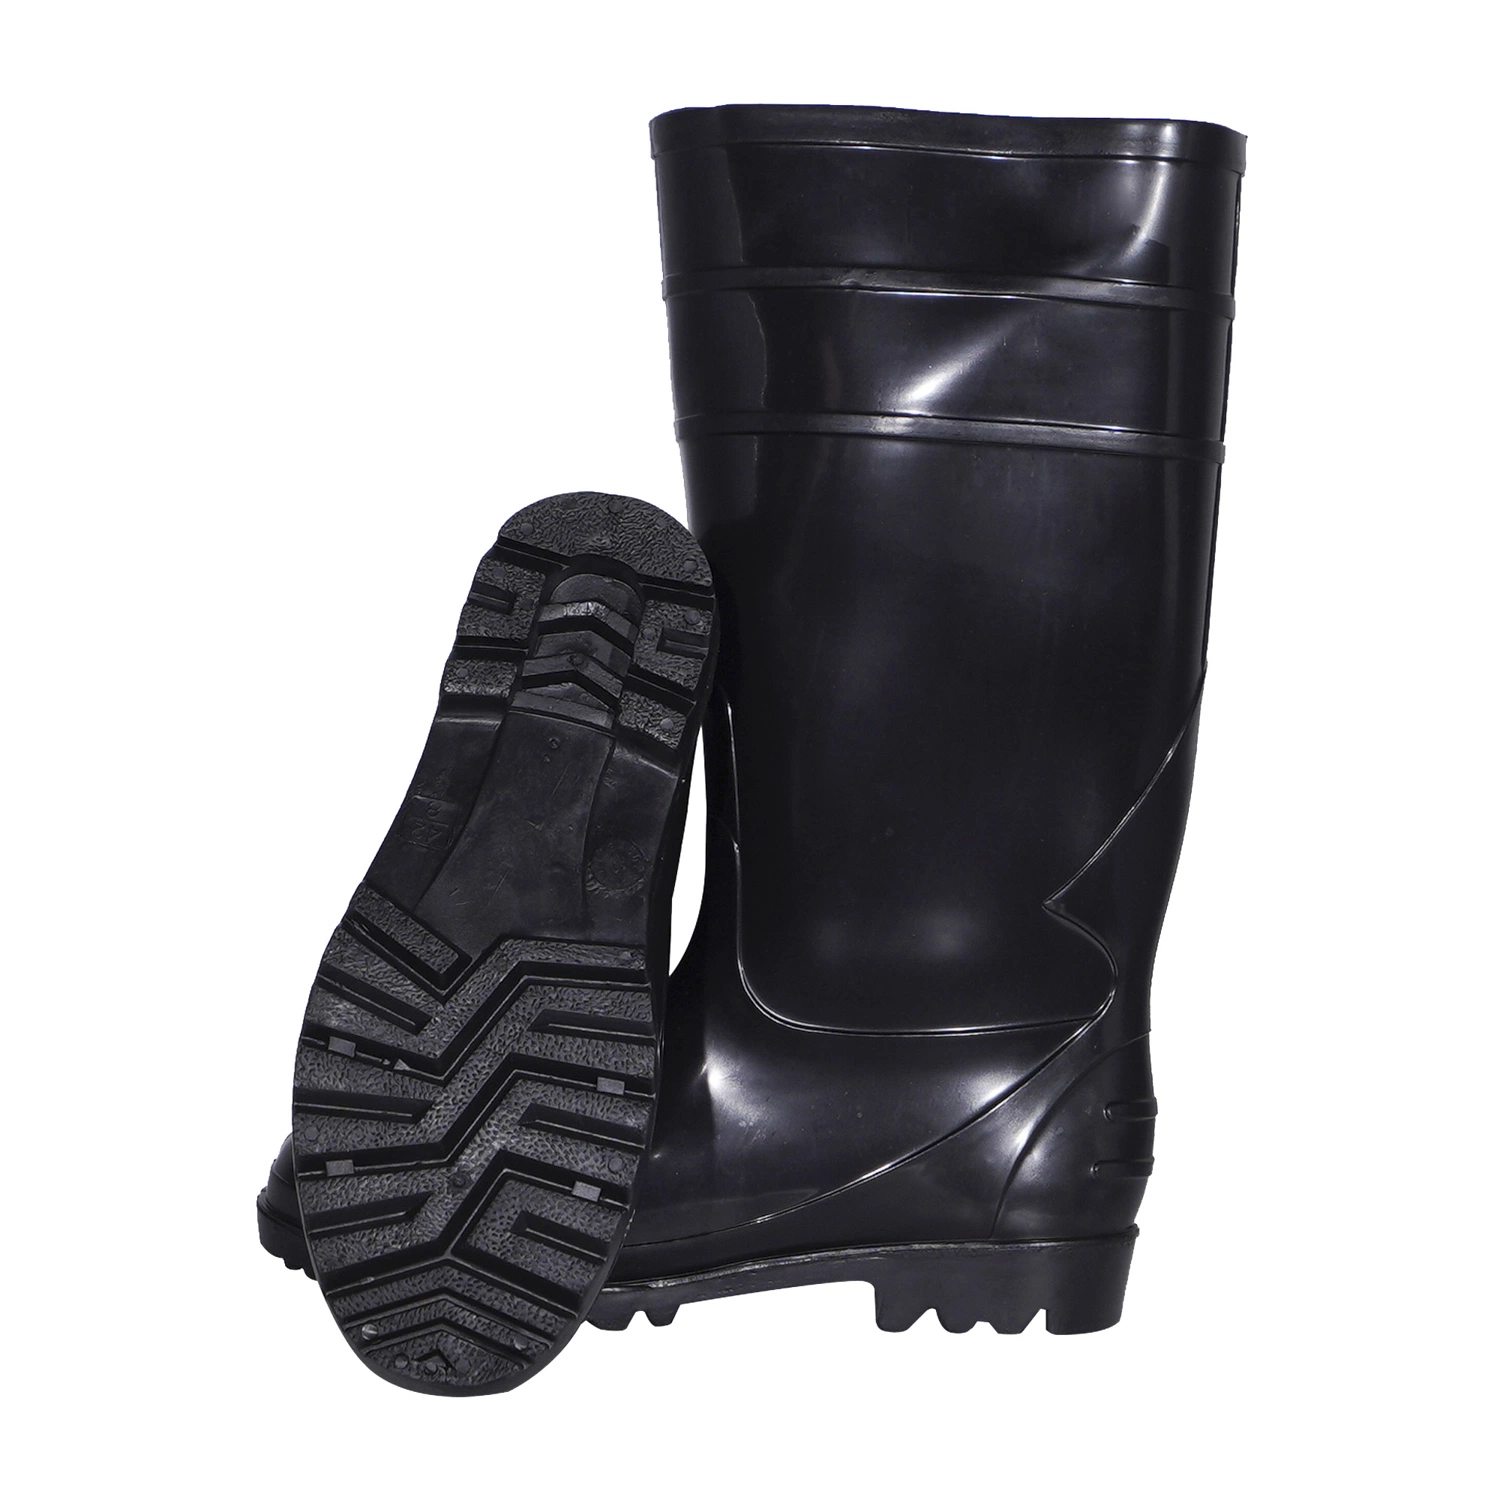 Best Selling Rain Boots Cheap PVC Boots Safety Rain Boots PVC Black Work Rain Boots for Food Industry Stuff/Oil Field